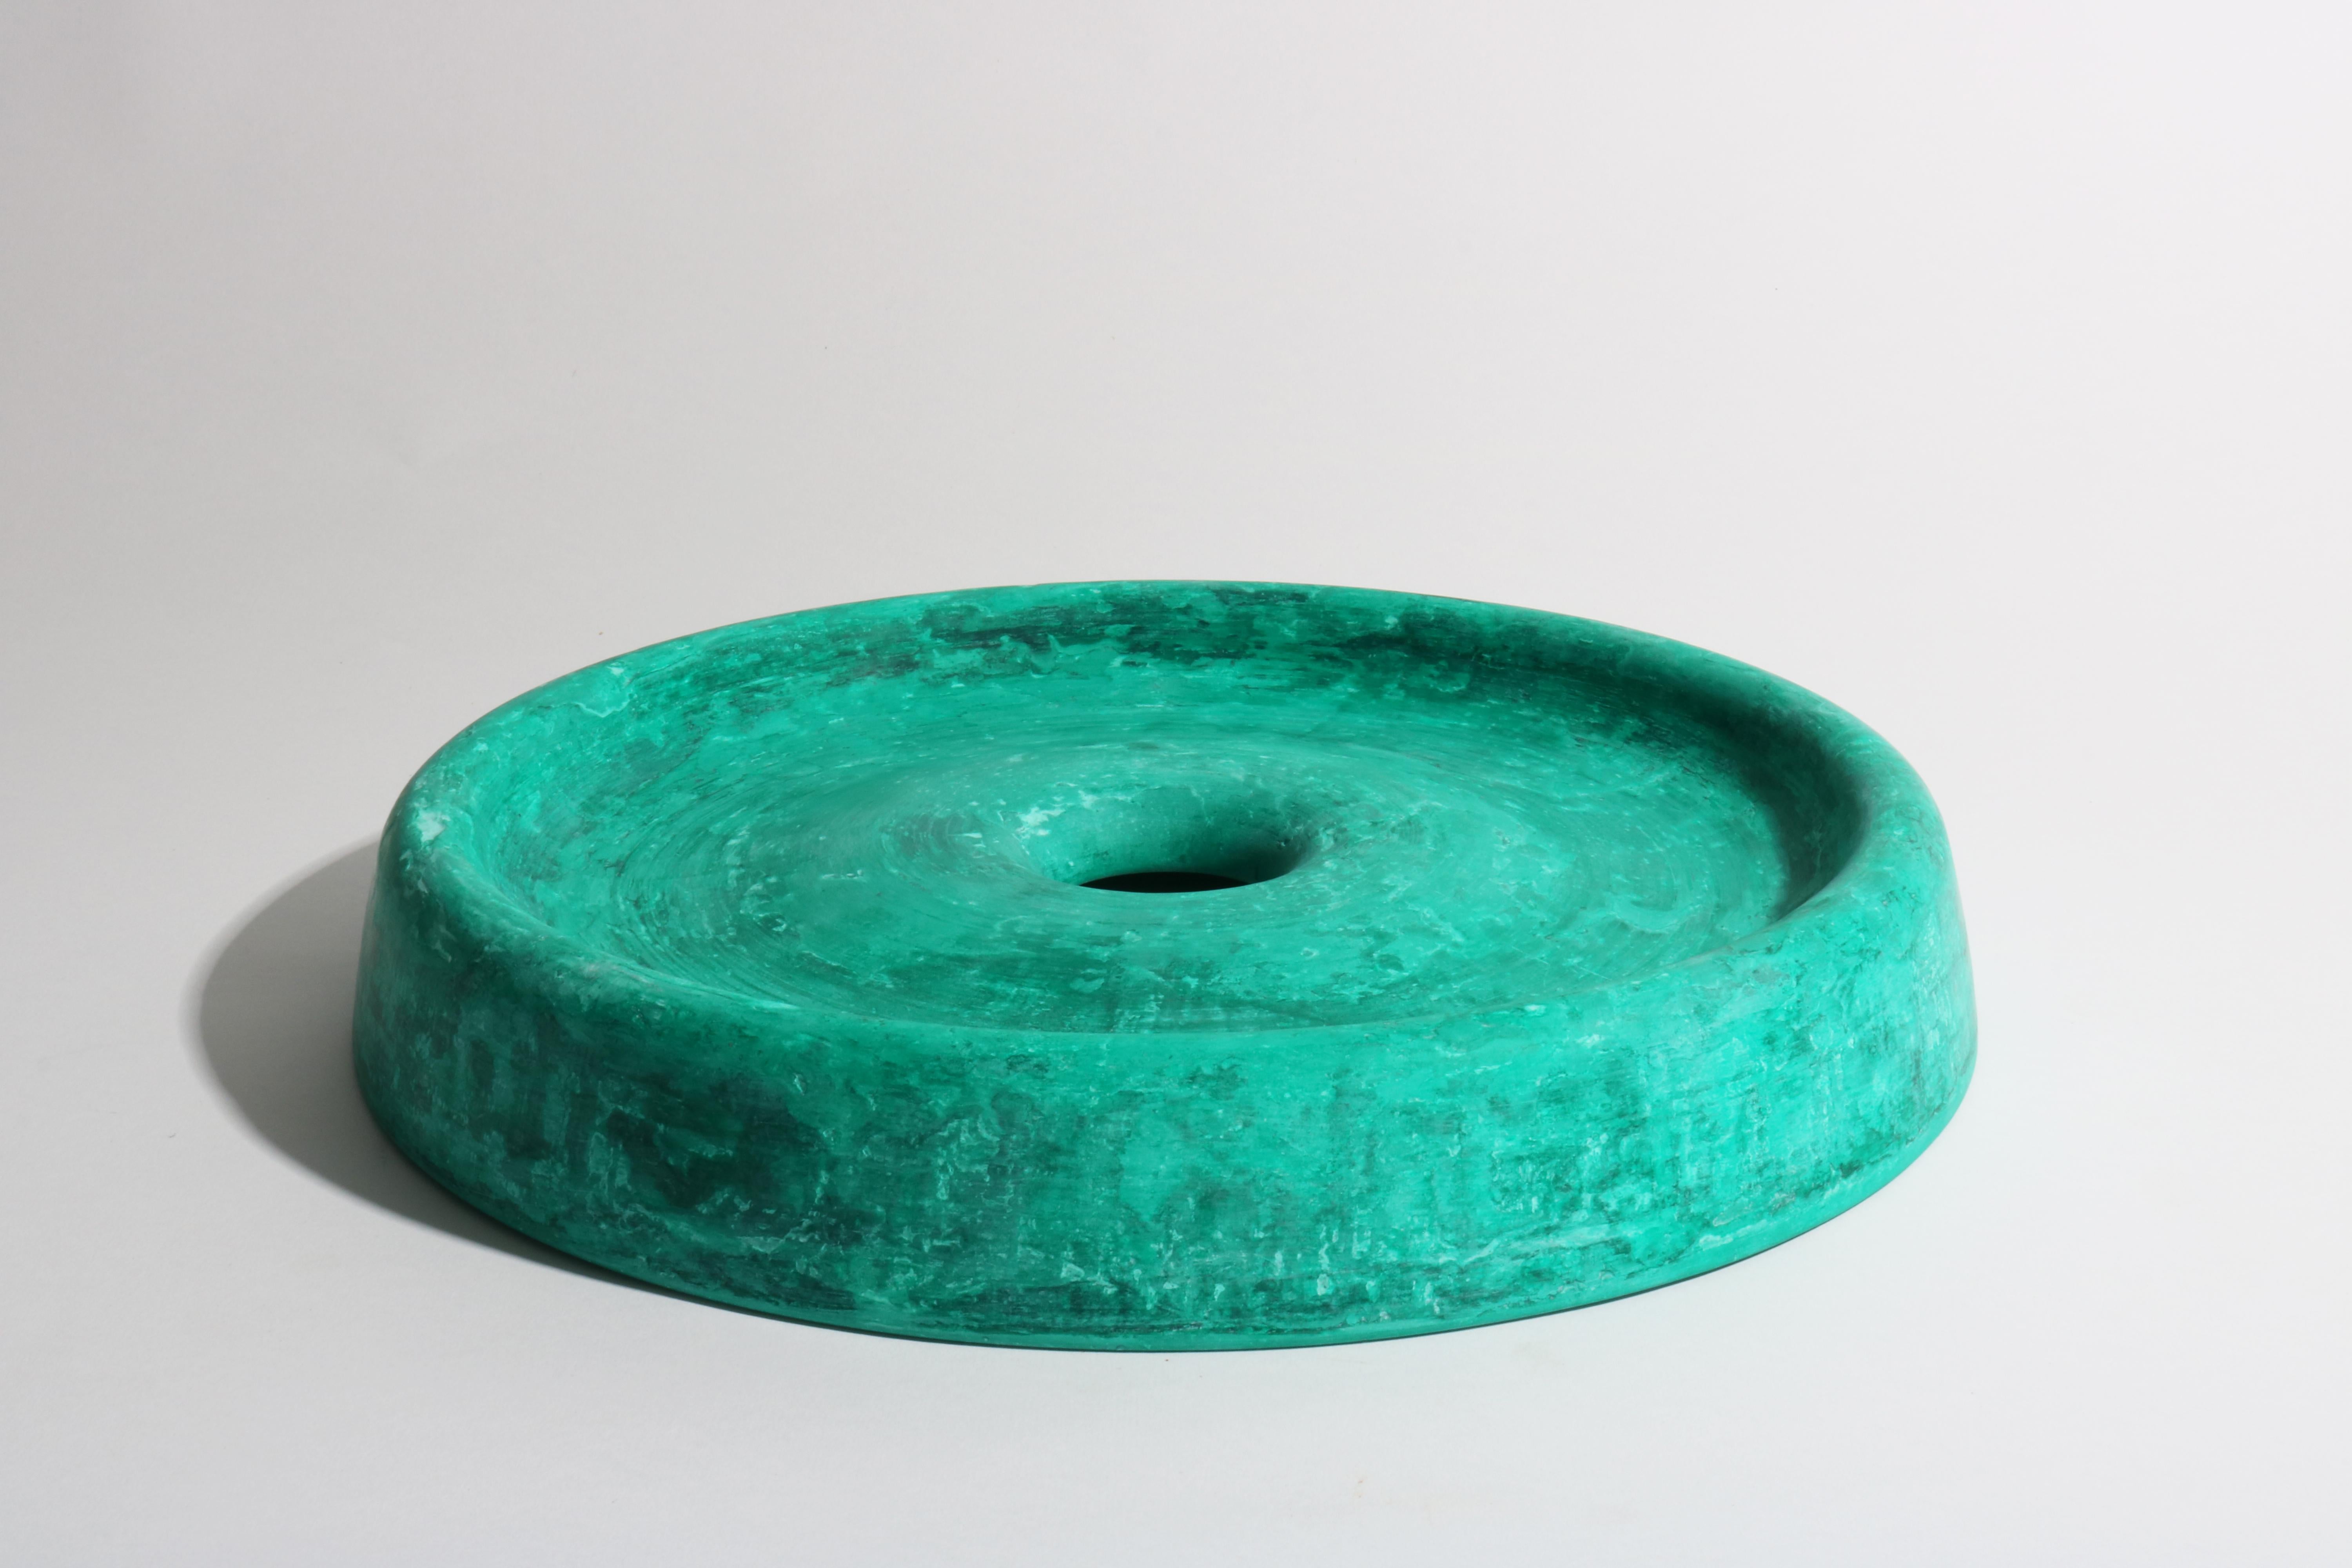 Forest green twirl bowl by Lenny Stöpp
Material: mineral powder & water-based acrylic hardener
Finish: Water-based coating
Dimensions: ± 5,5 x 35 cm
Weight: ±3kg

All pieces are handmade and therefore unique.
Because I use the running cornice